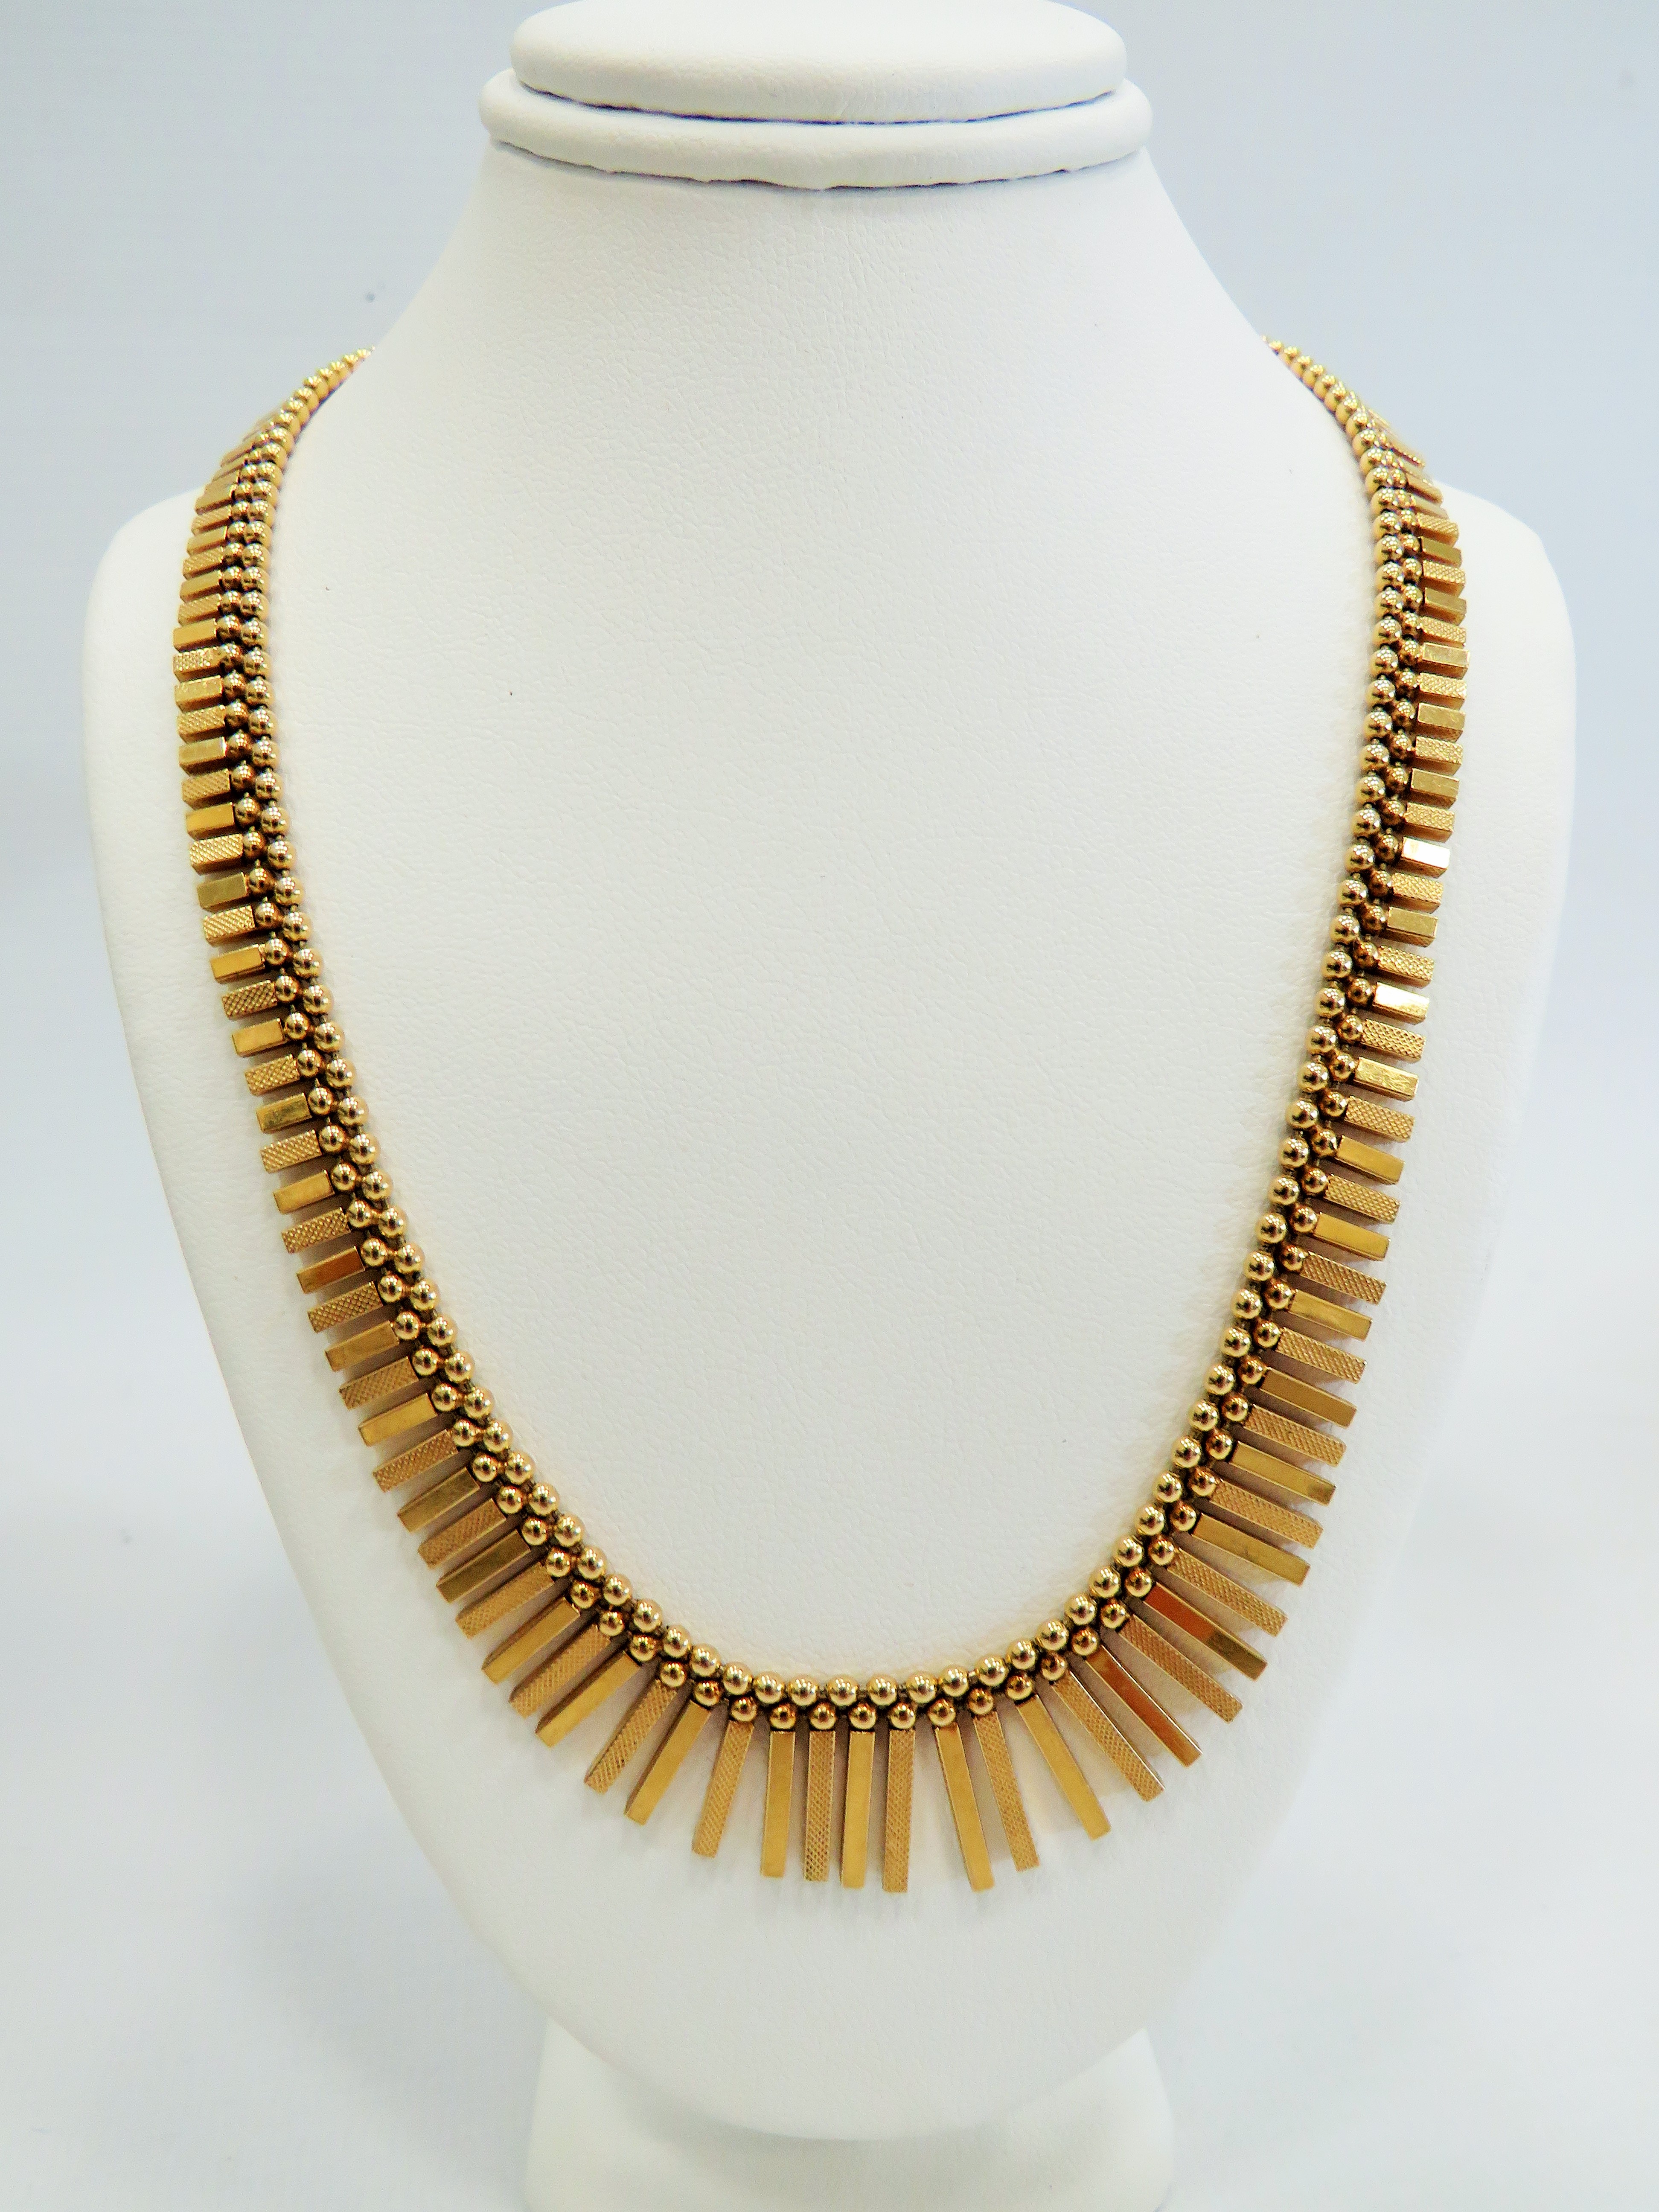 9ct Gold Graduated Fringe necklace. 18 inches long.  Total weight 23.2g